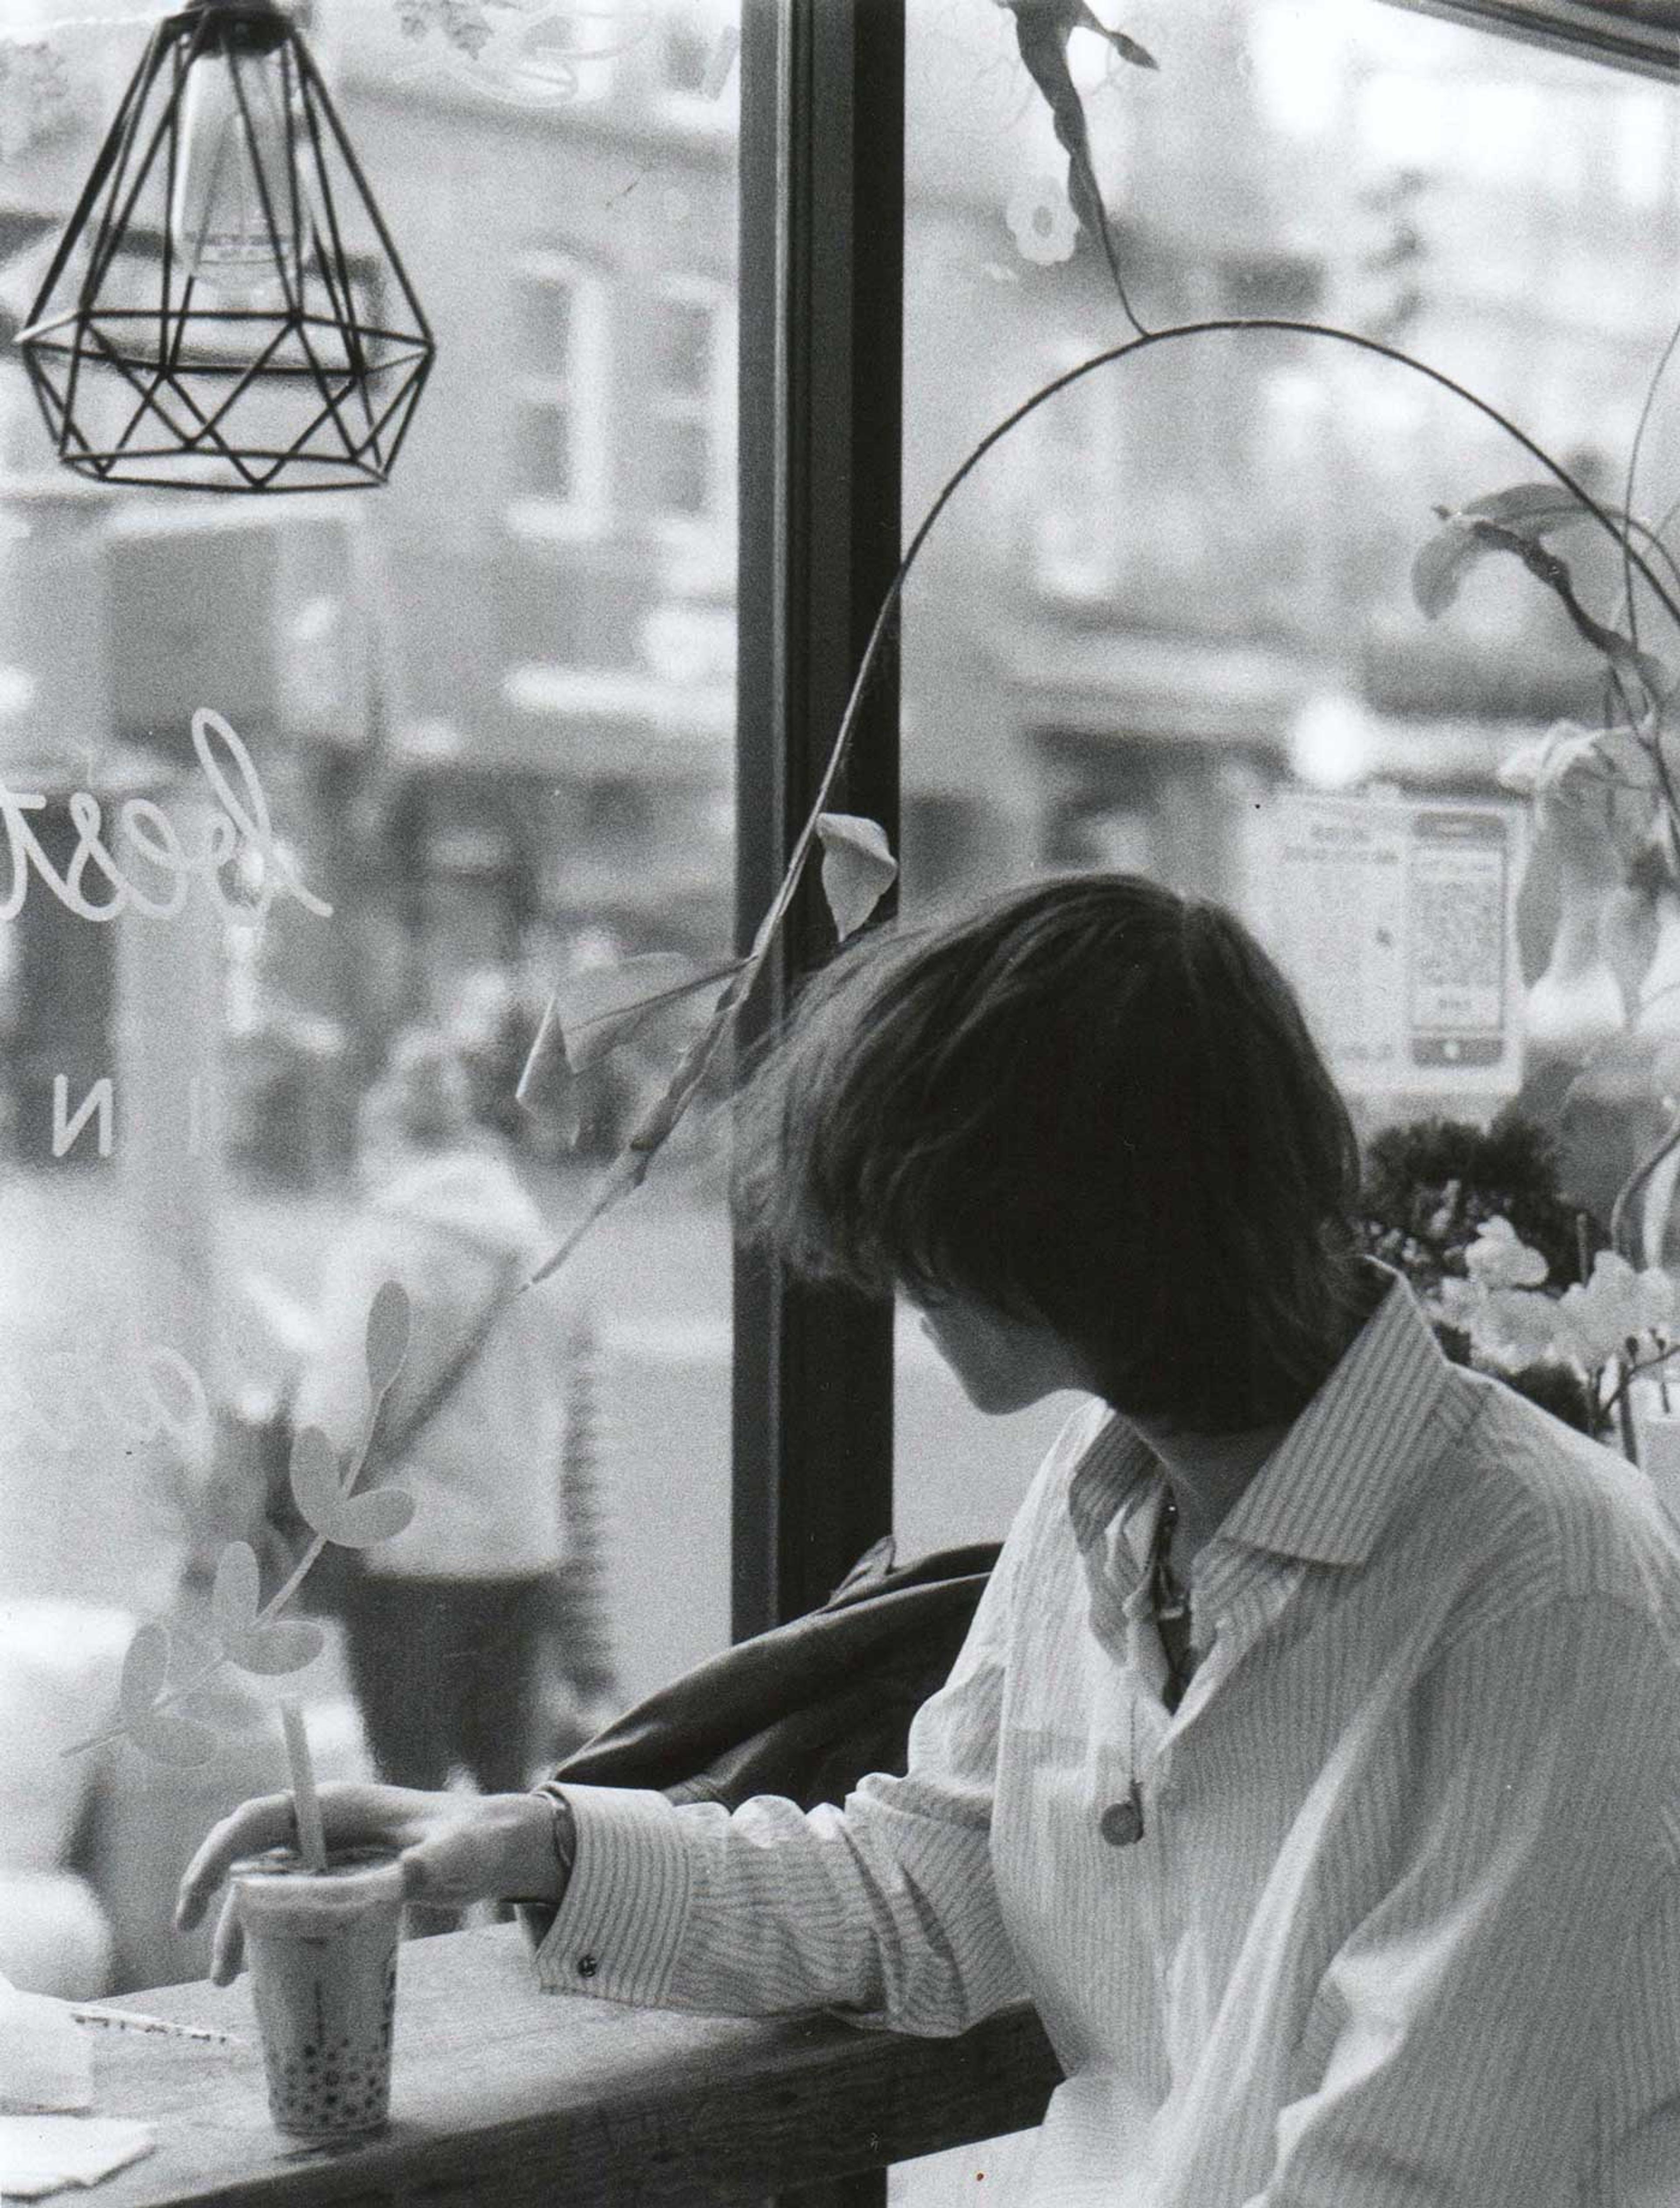 Photograph of a person drinking tea while looking out a shop window.